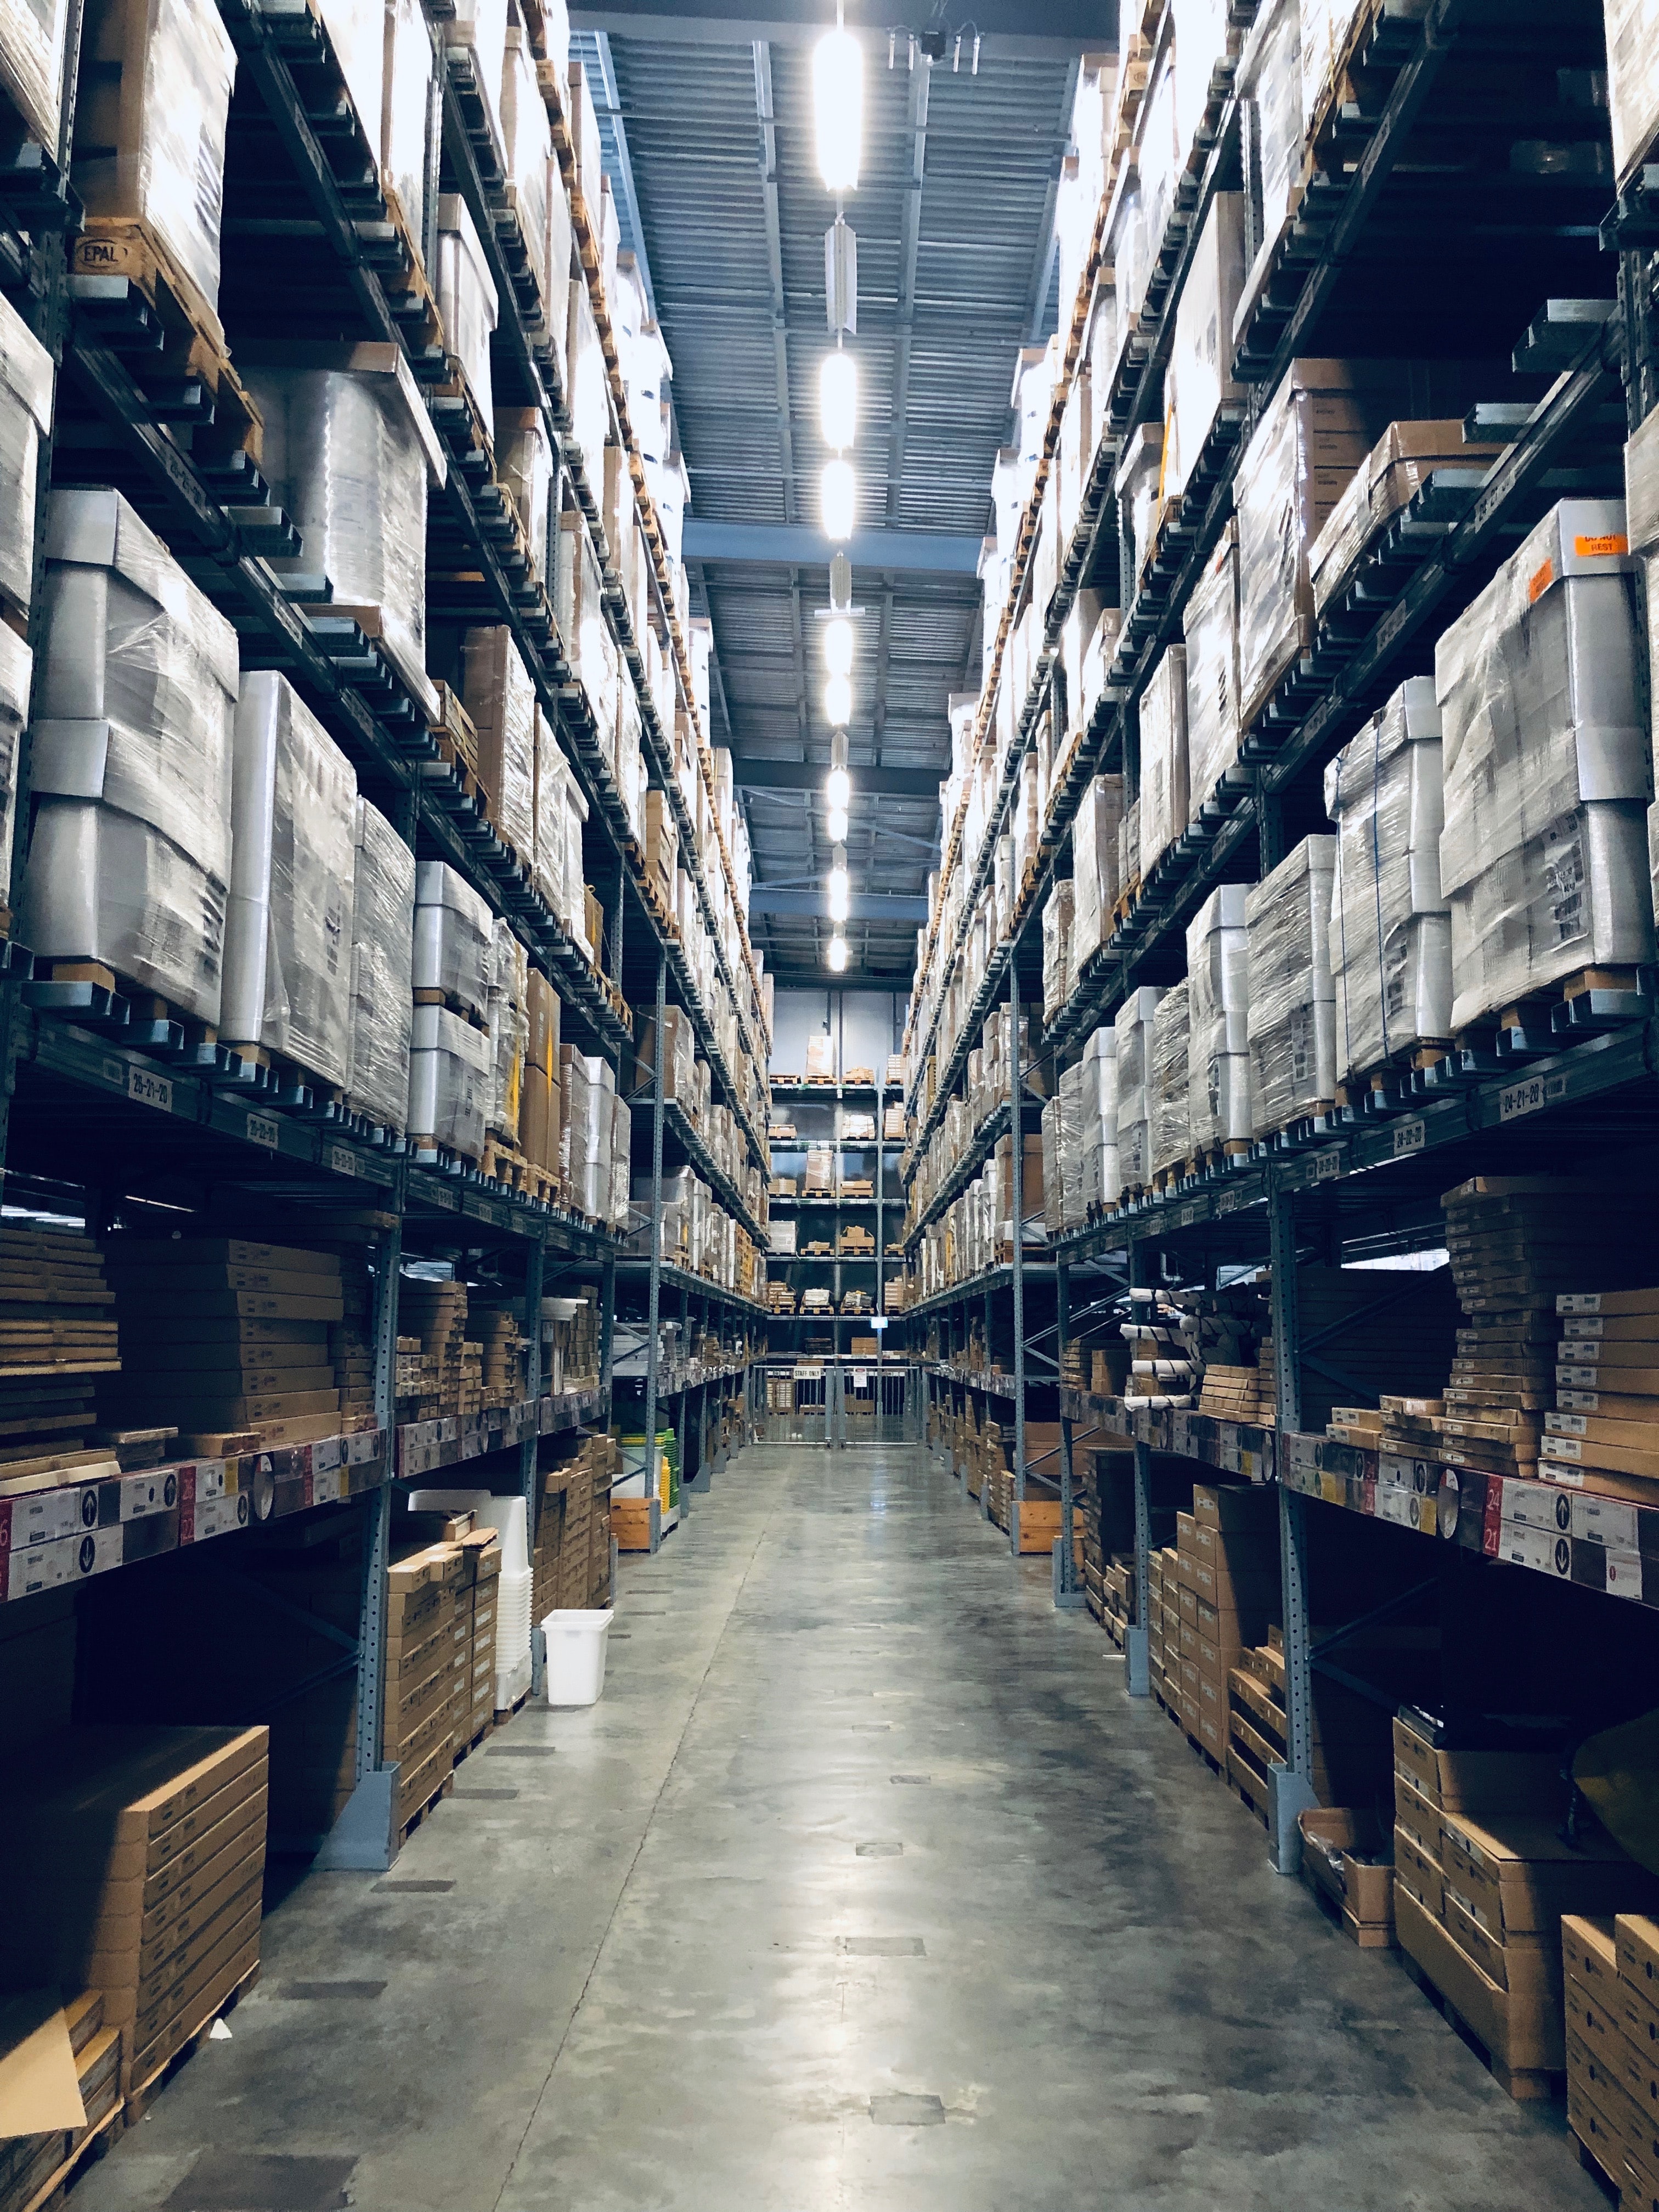 SkuNexus provides a full suite of warehouse management solutions.